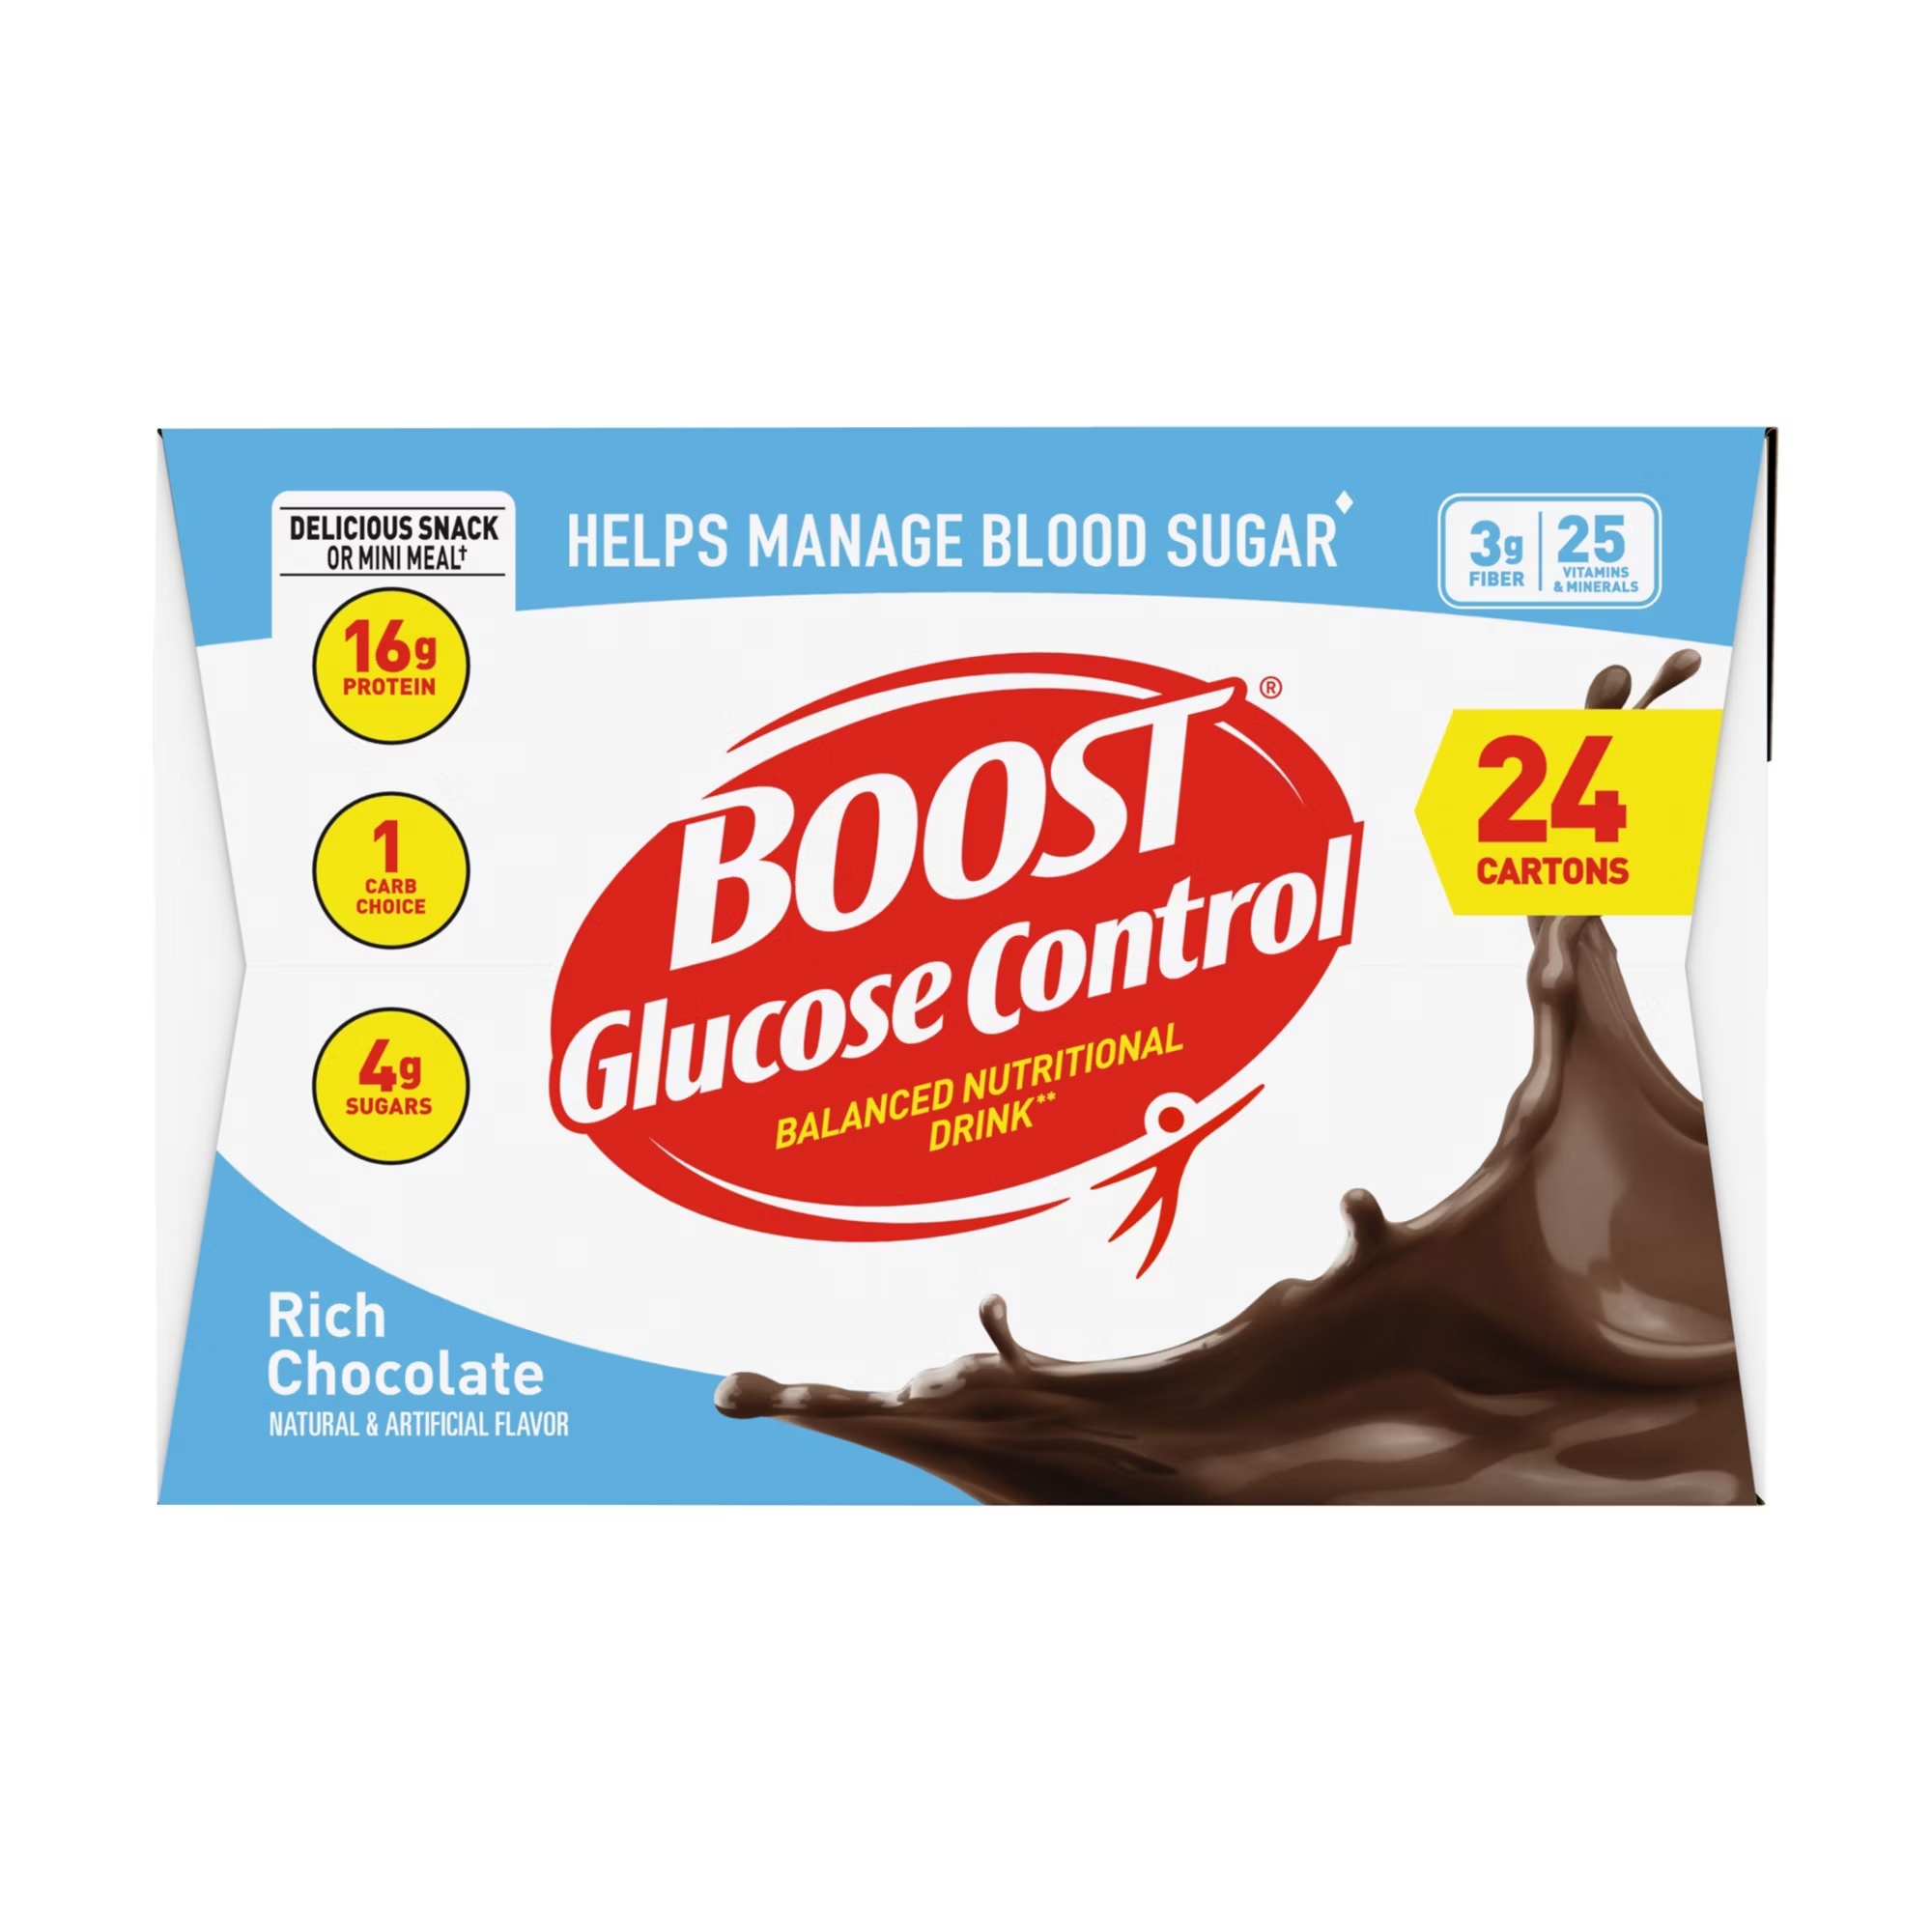 19-best-boost-glucose-control-nutrition-facts